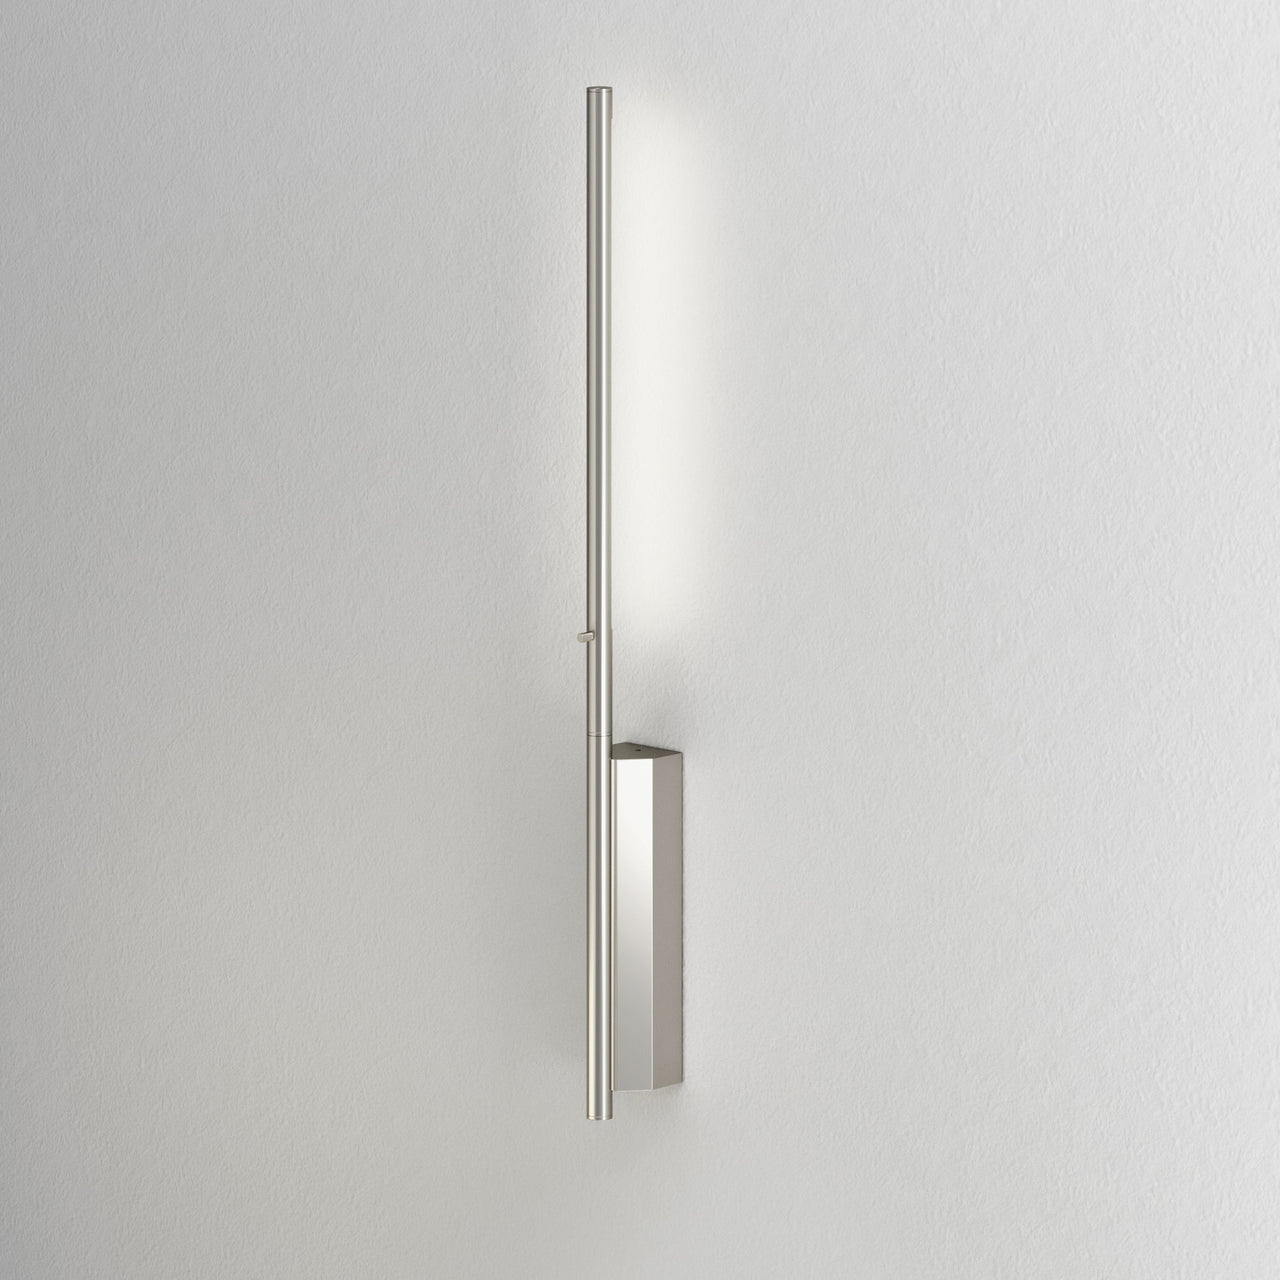 IP Link Reading Wall Light: Large